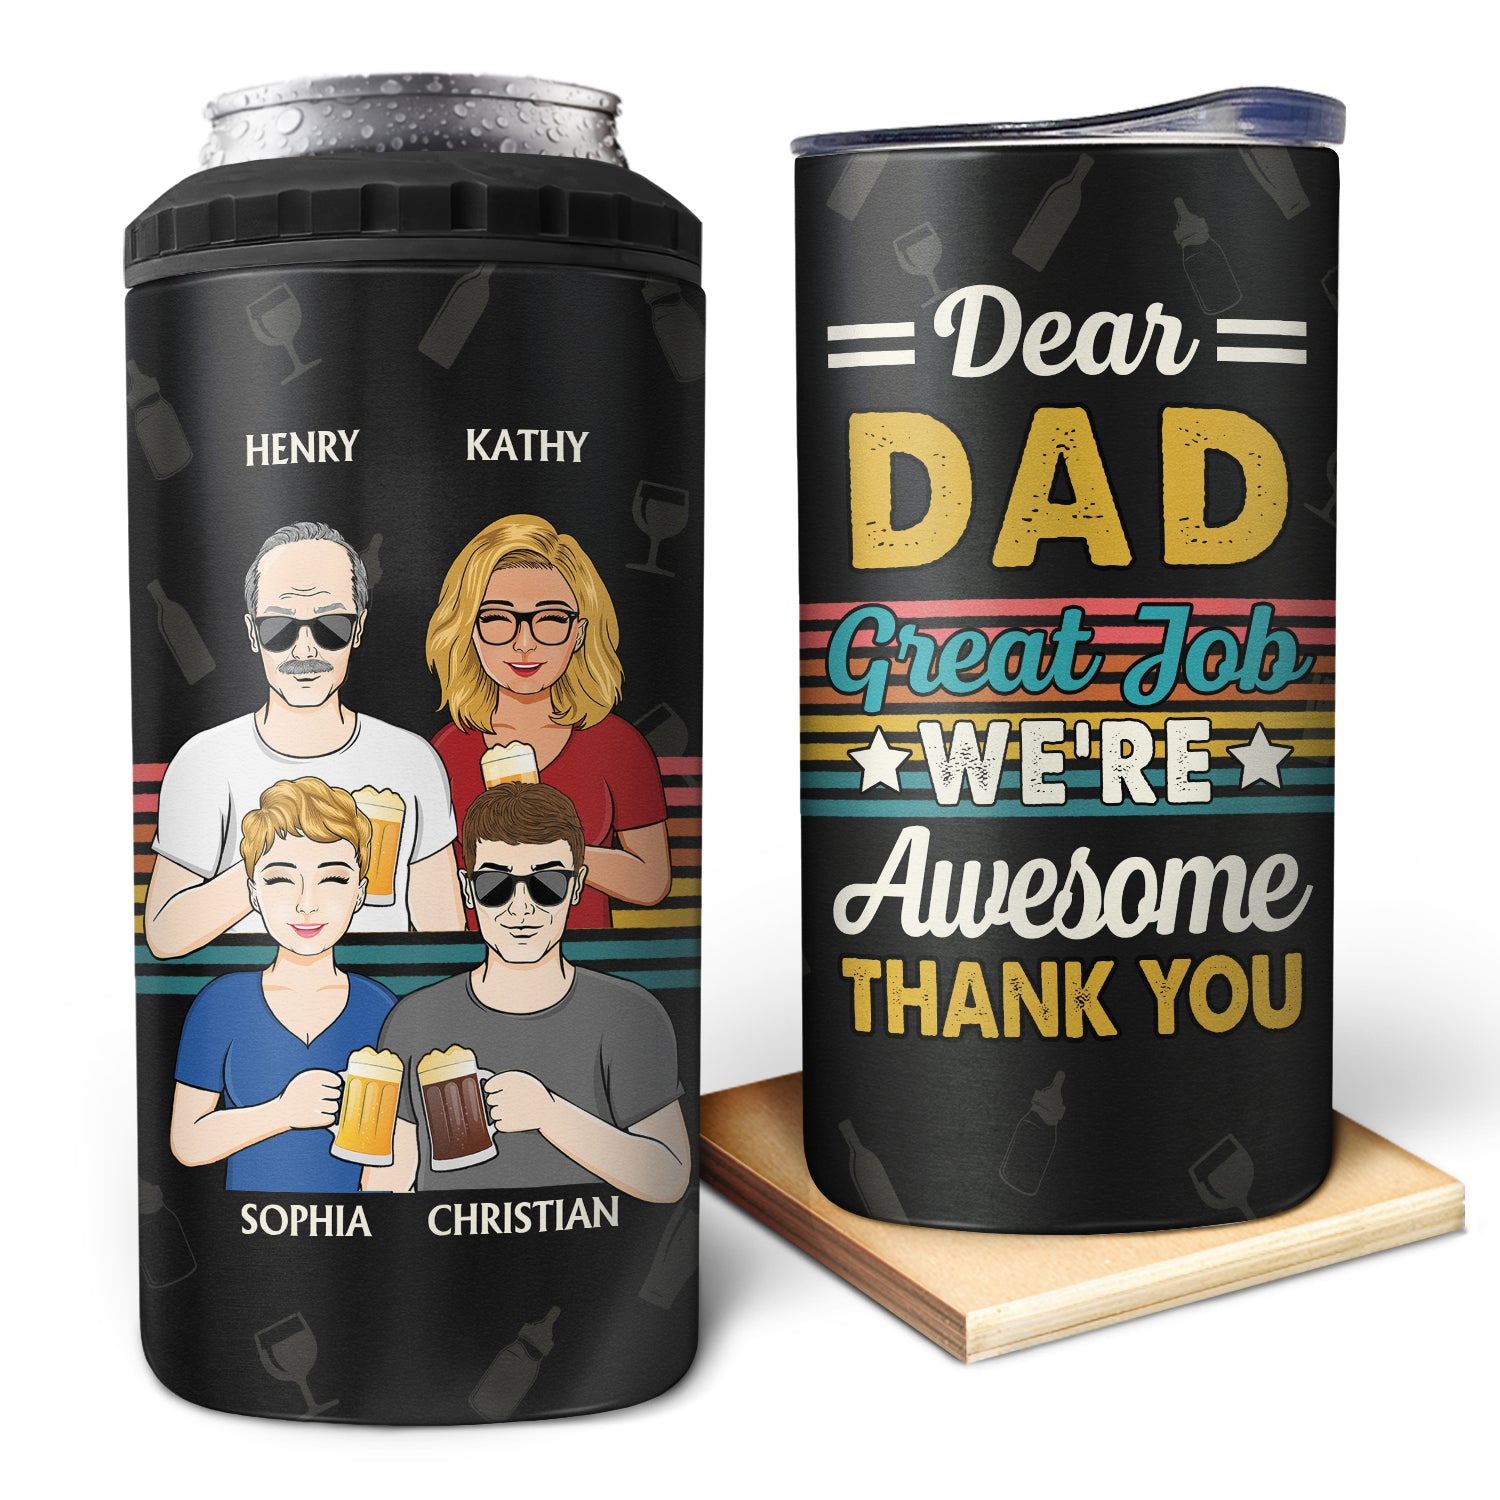 Dear Dad Great Job We're Awesome - Gift For Father, Daddy - Personalized Custom 4 In 1 Can Cooler Tumbler